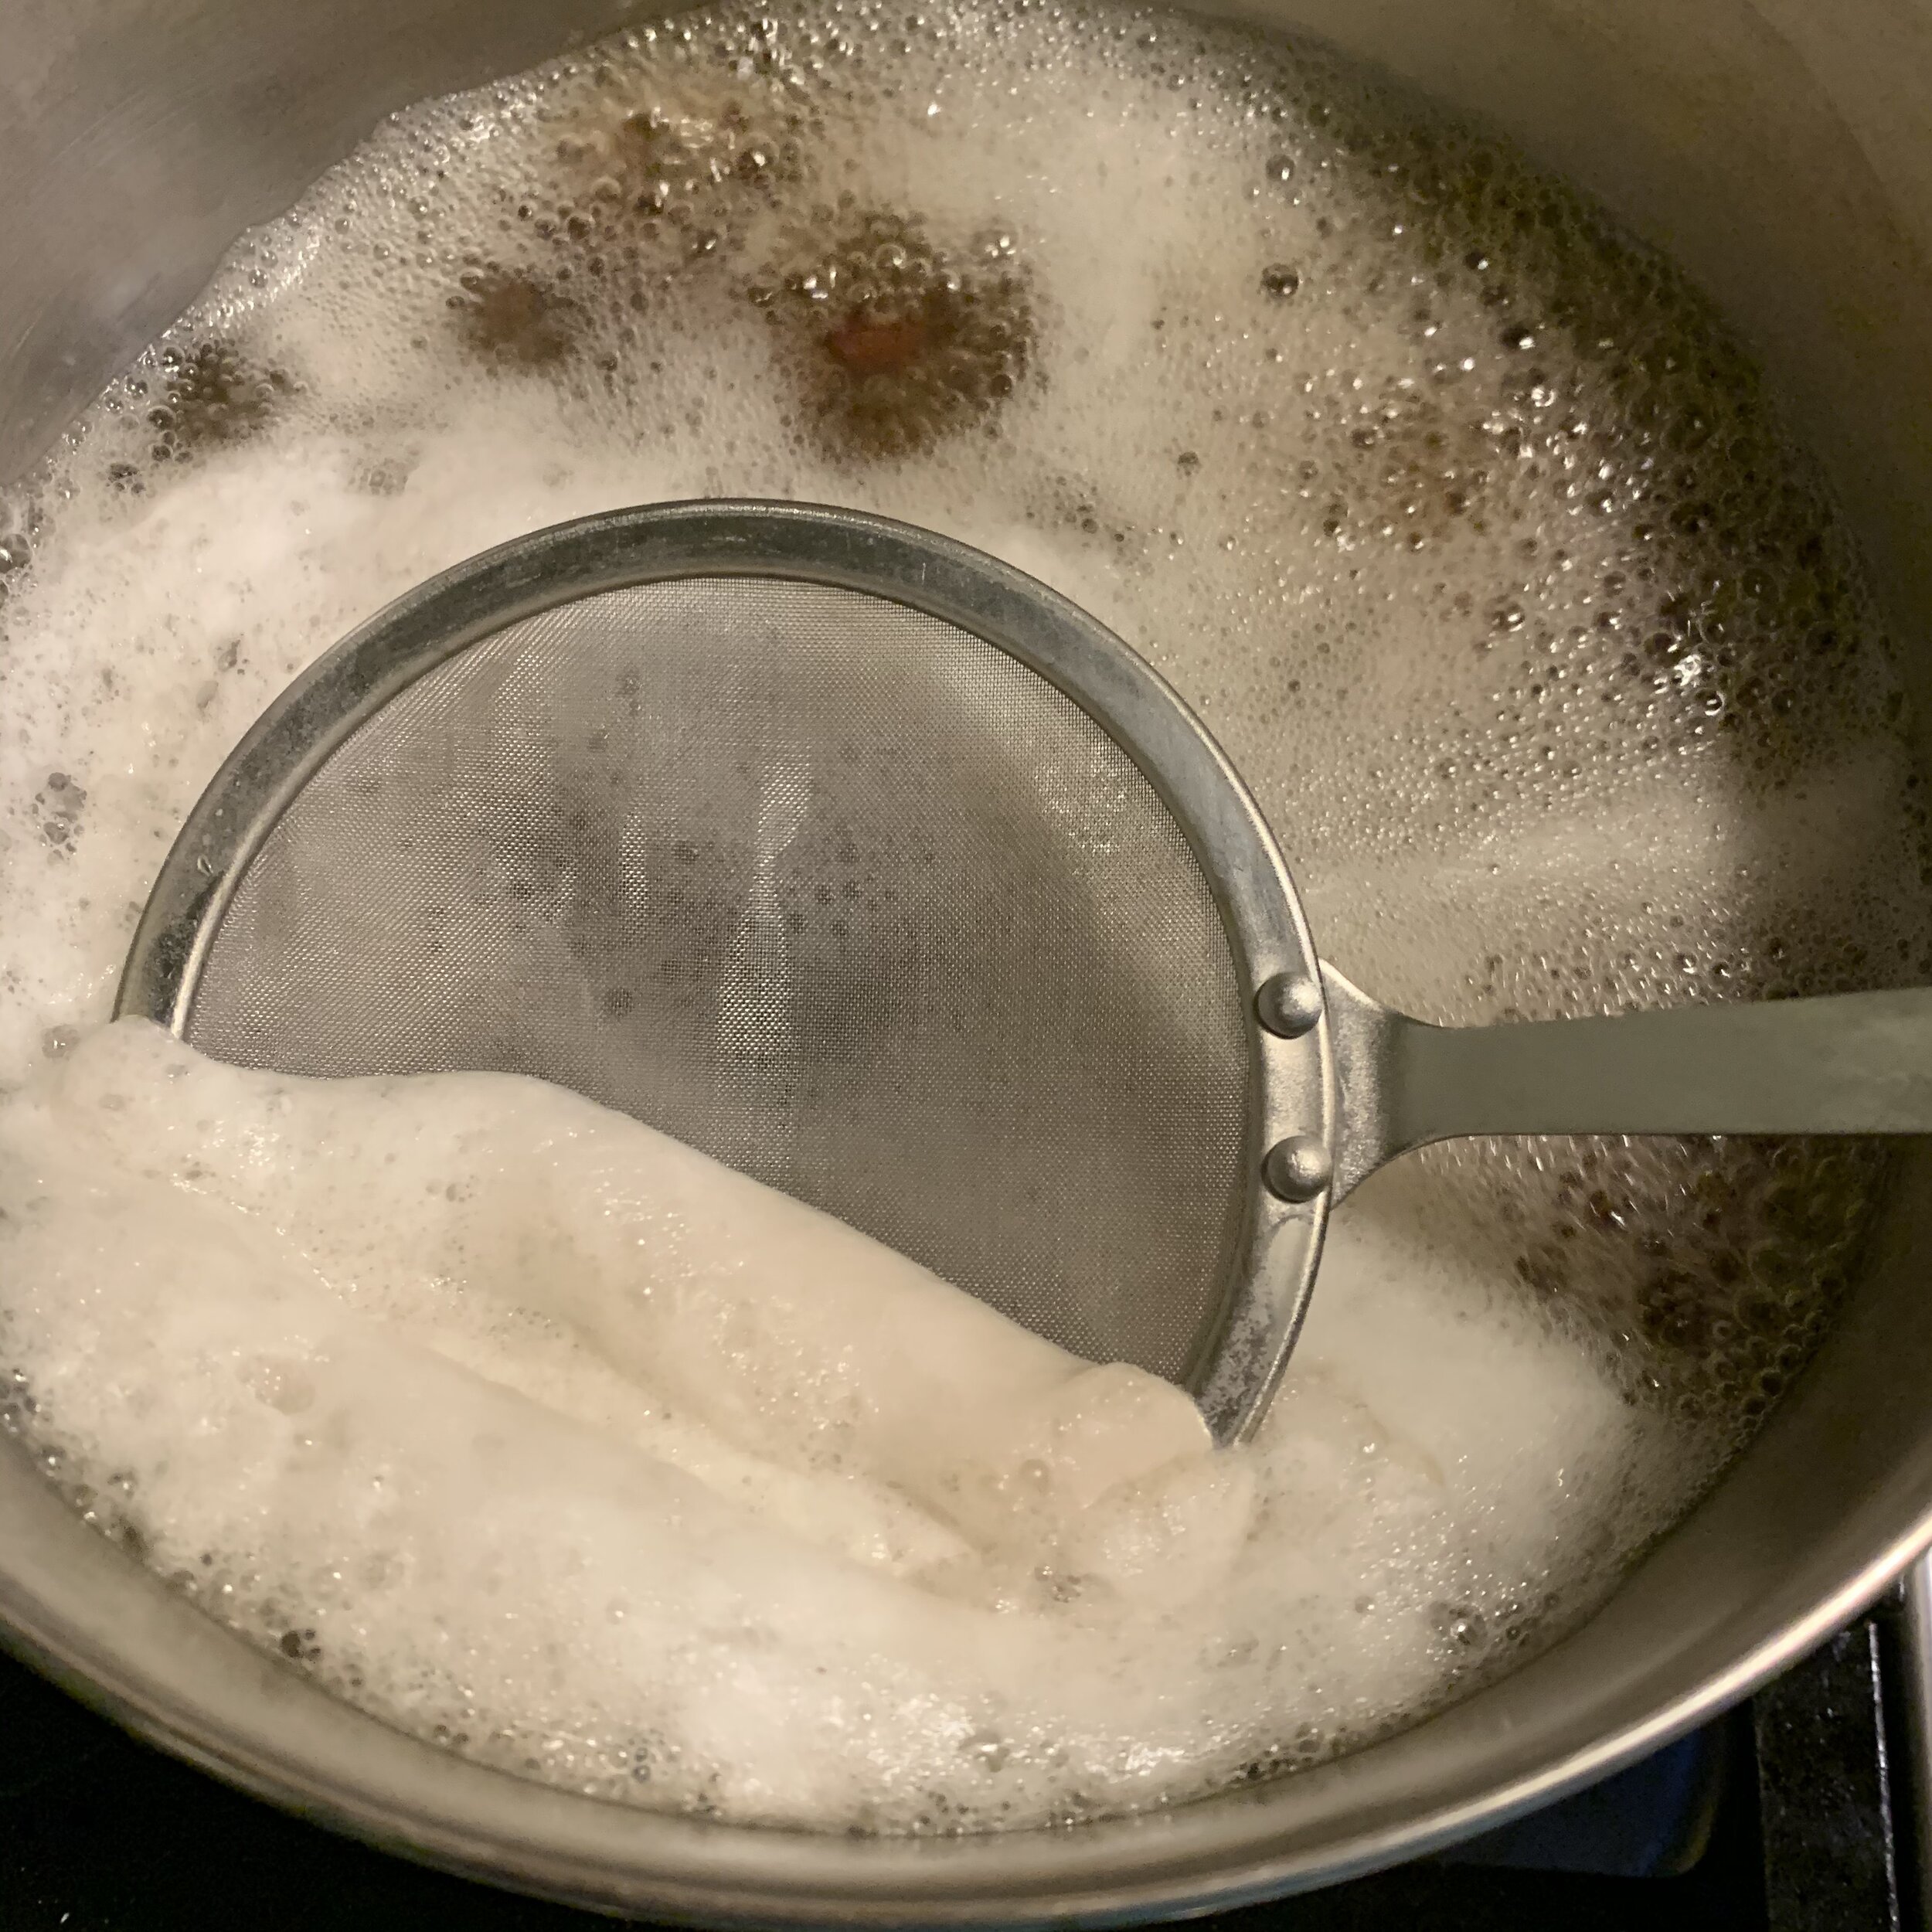 skimming scum off the first boil